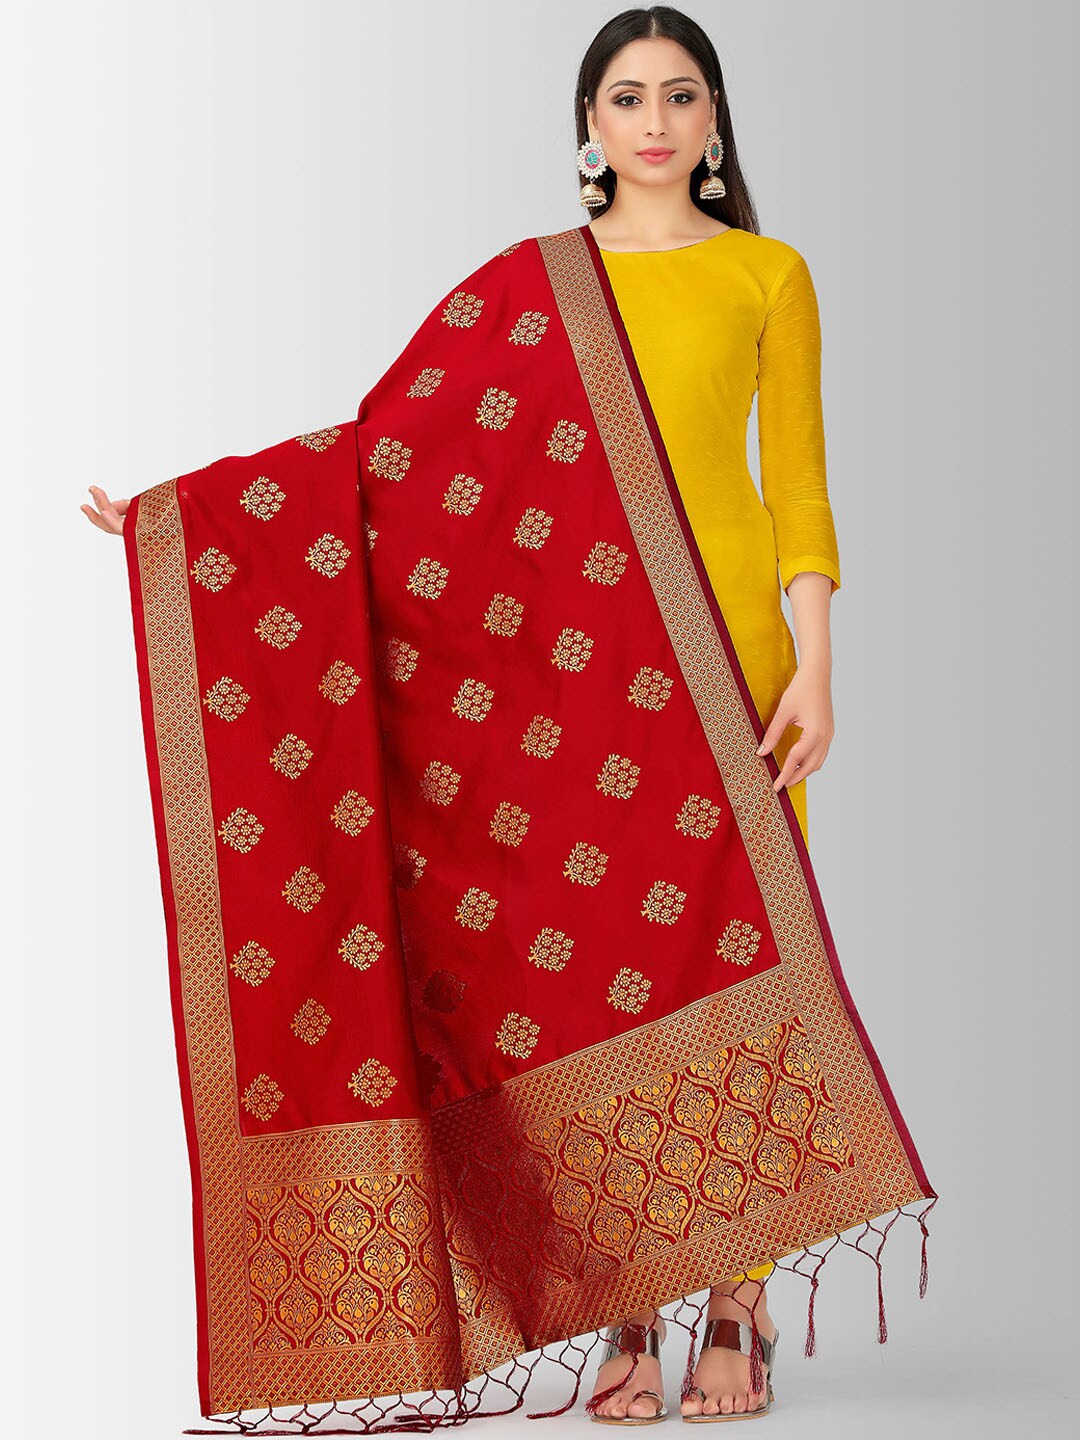 MIMOSA Maroon & Gold-Toned Woven Design Dupatta Price in India